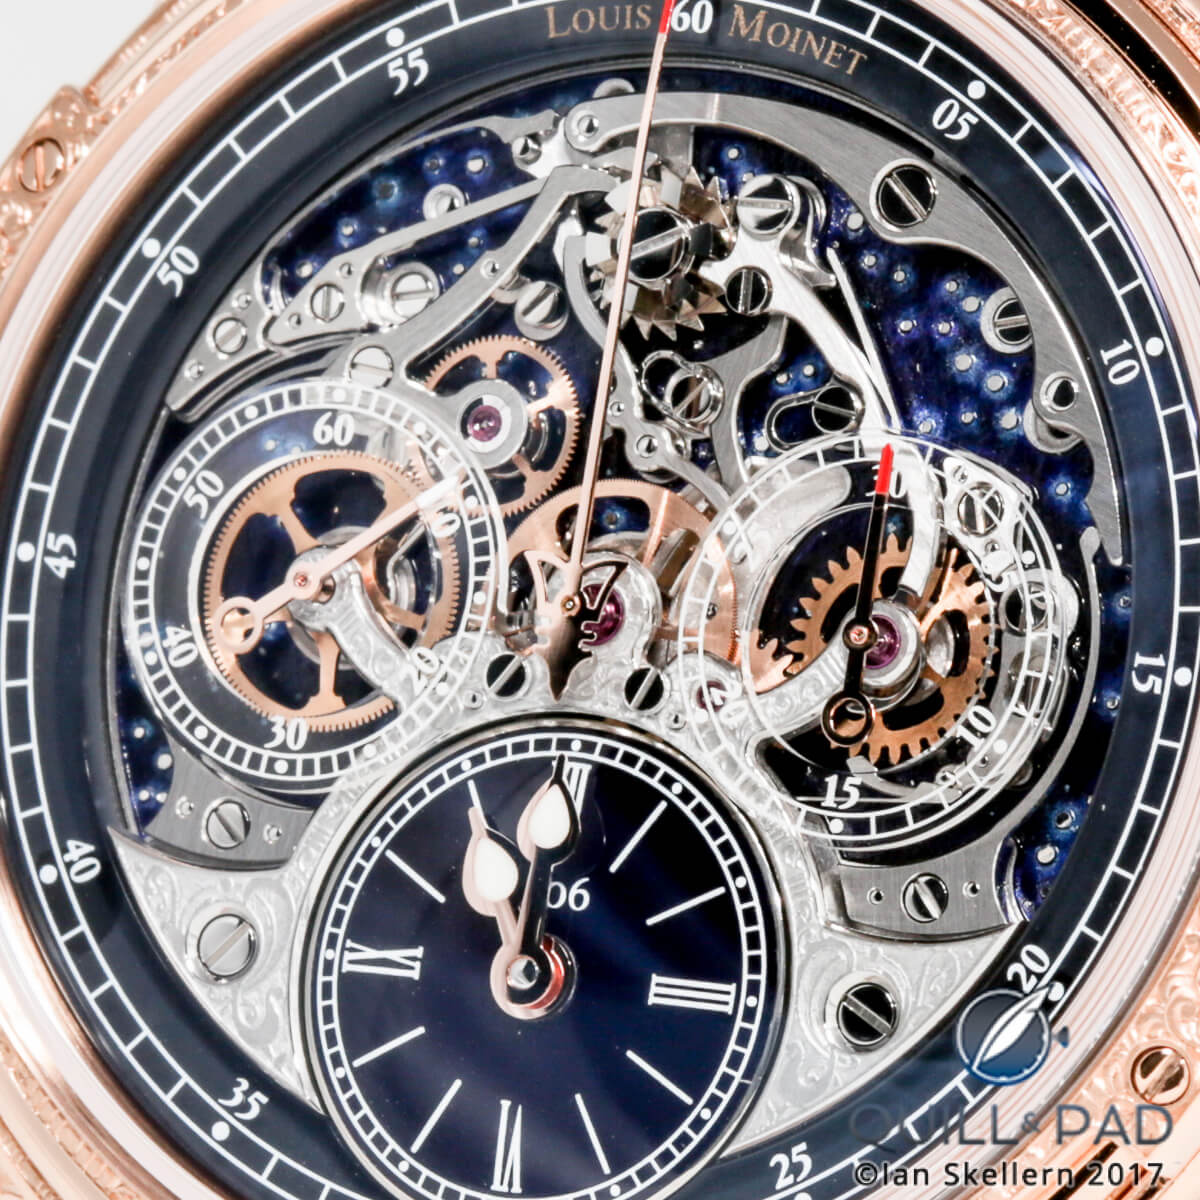 Close up look dial side of the Louis Moinet Memoris Red Eclipse